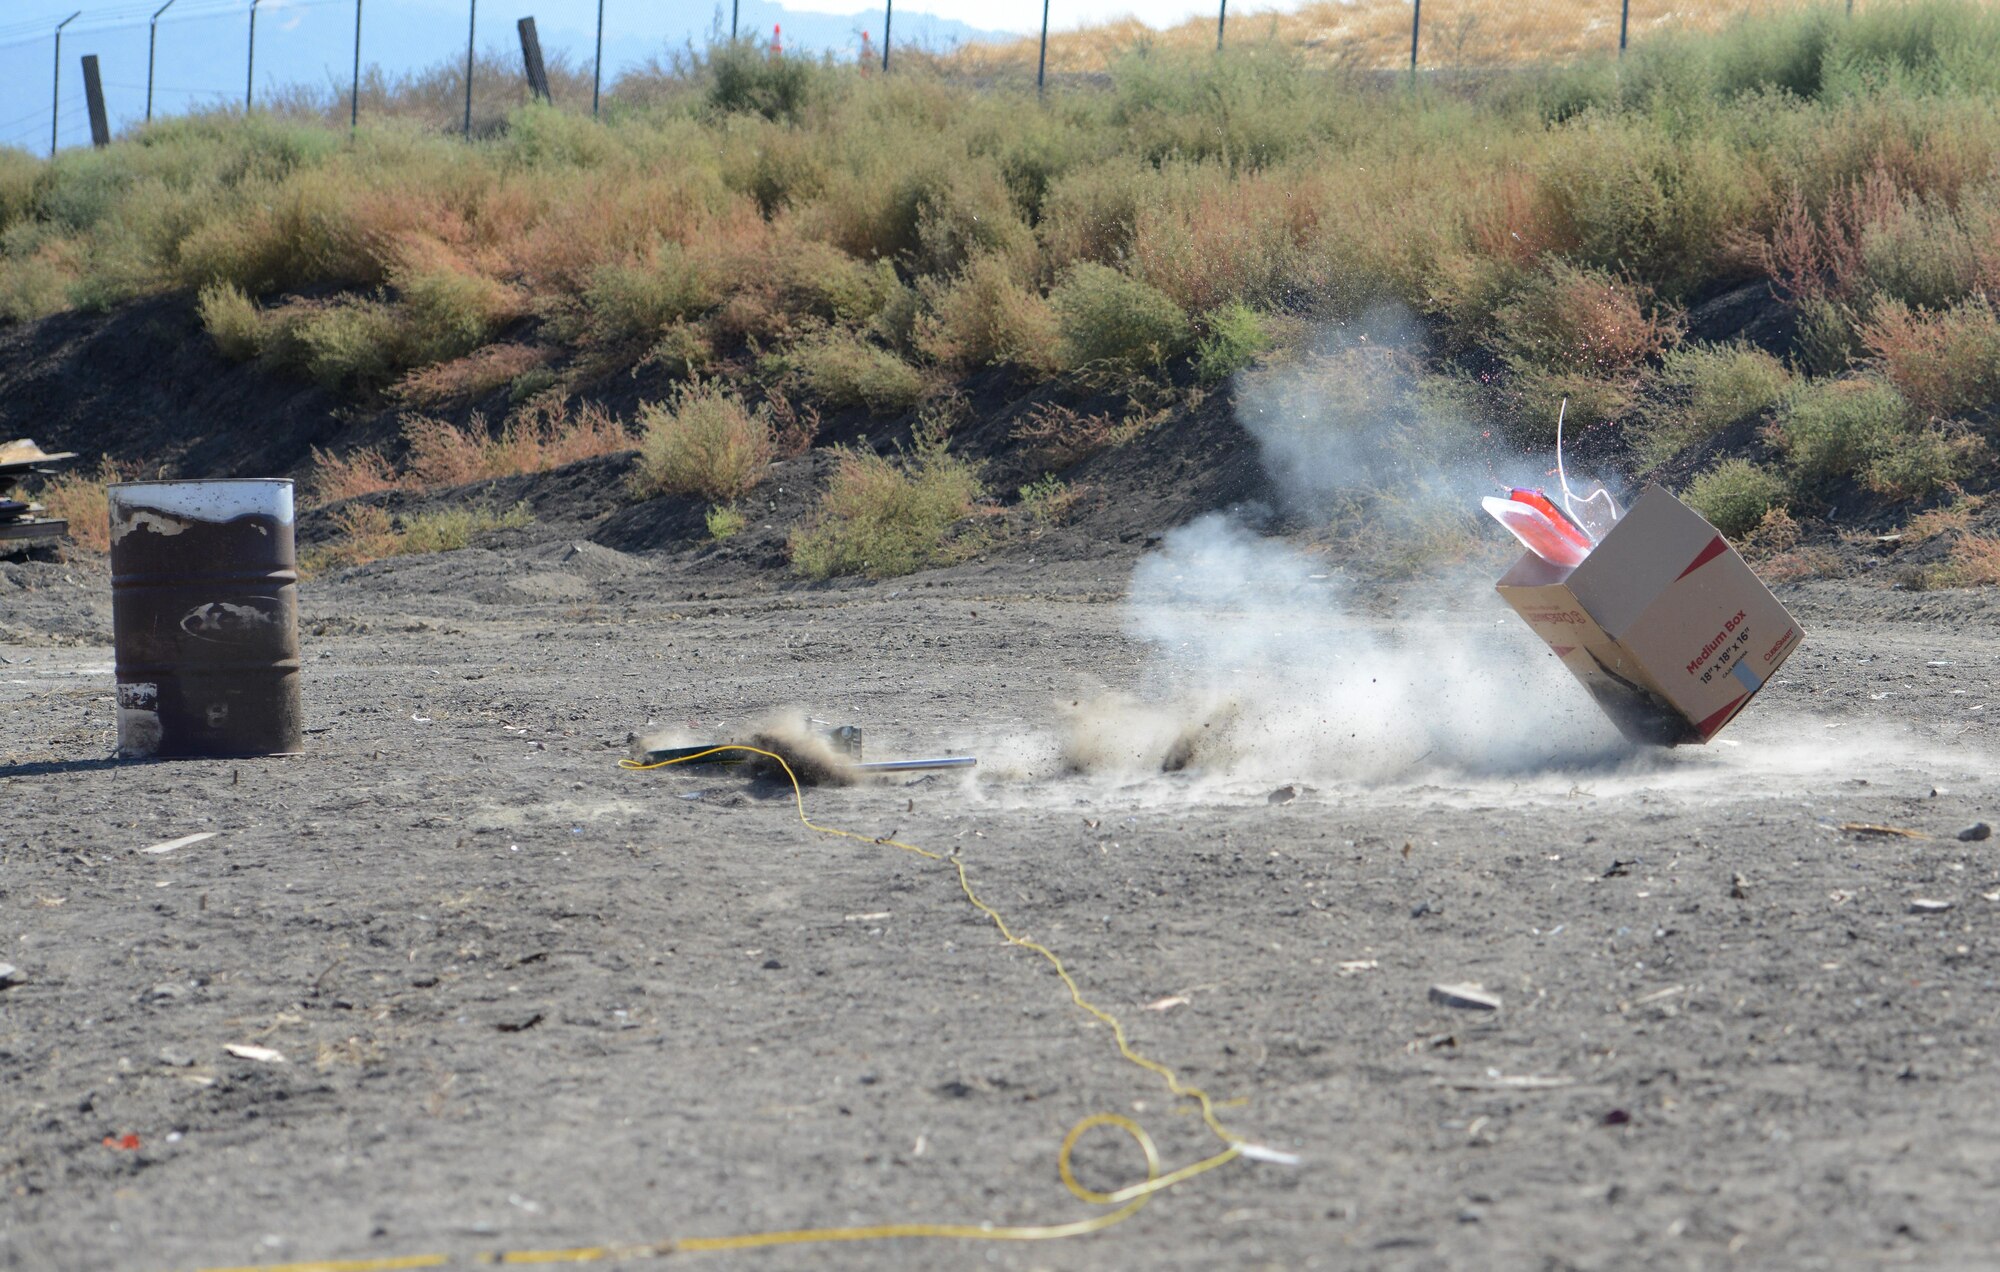 9th Civil Engineer Squadron explosive ordnance technicians disable a simulated explosive device